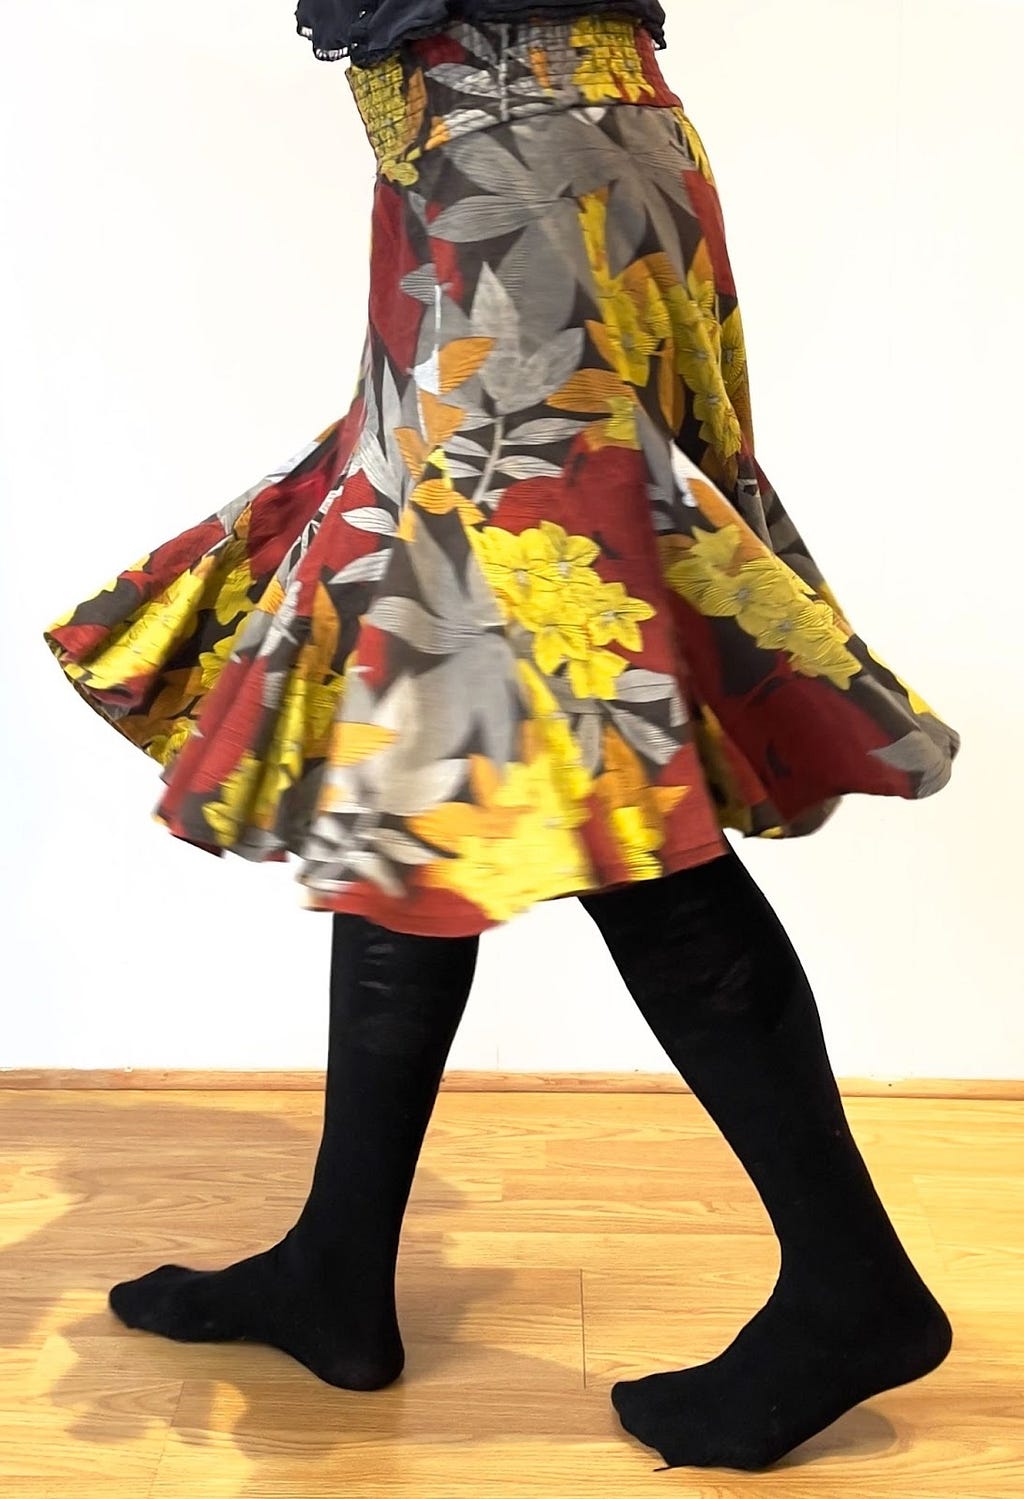 Spinning with red/yellow/grey/orange flower patterned skirt, and black tights.